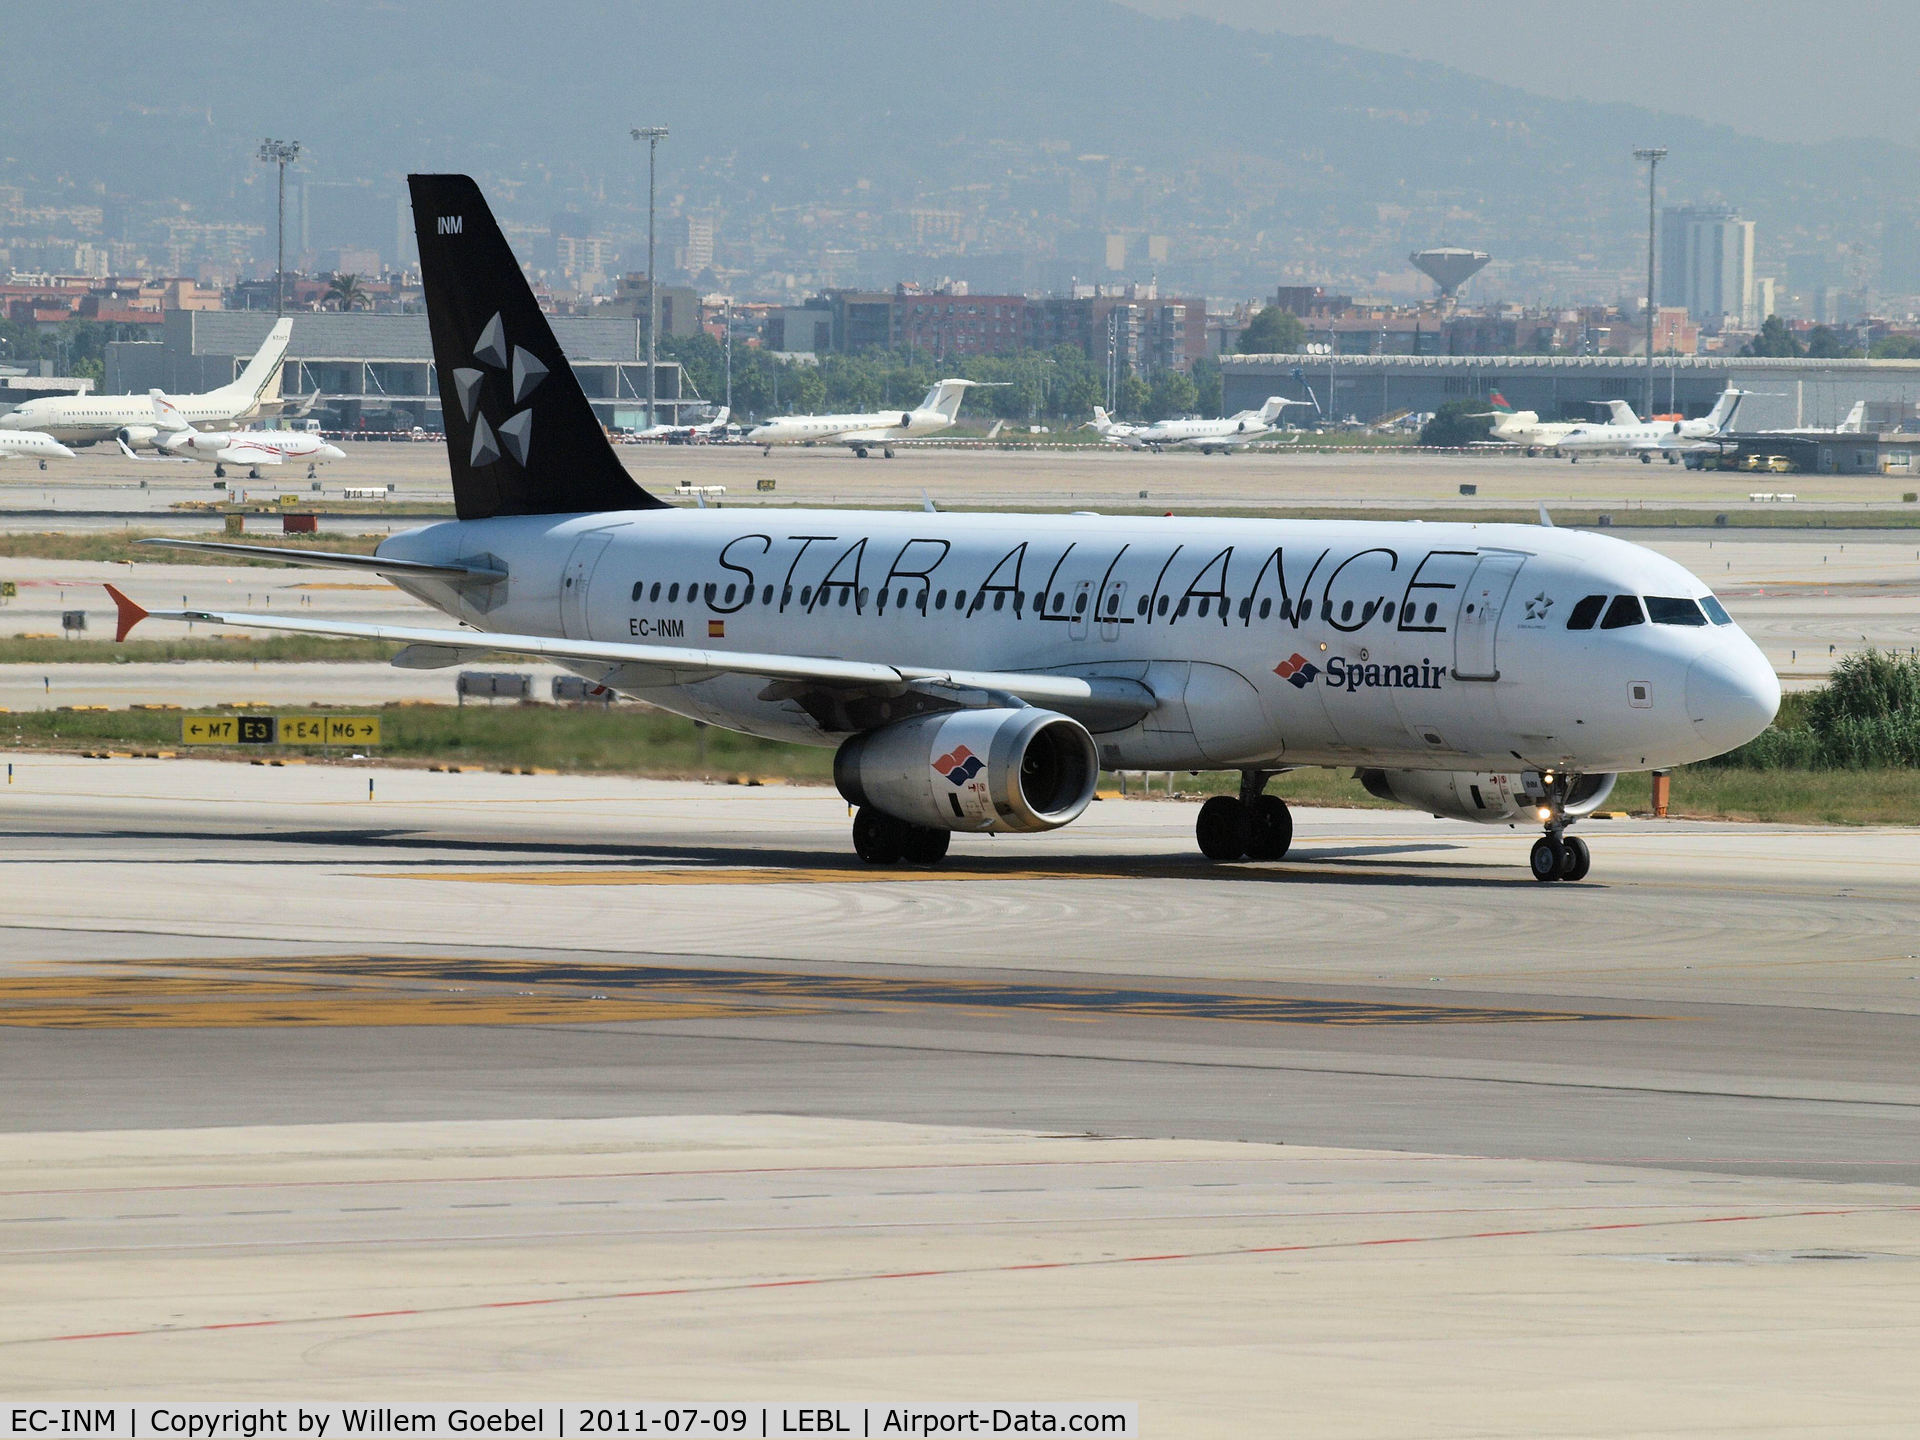 EC-INM, 2003 Airbus A320-232 C/N 1979, Arrival on Barcelona Airport